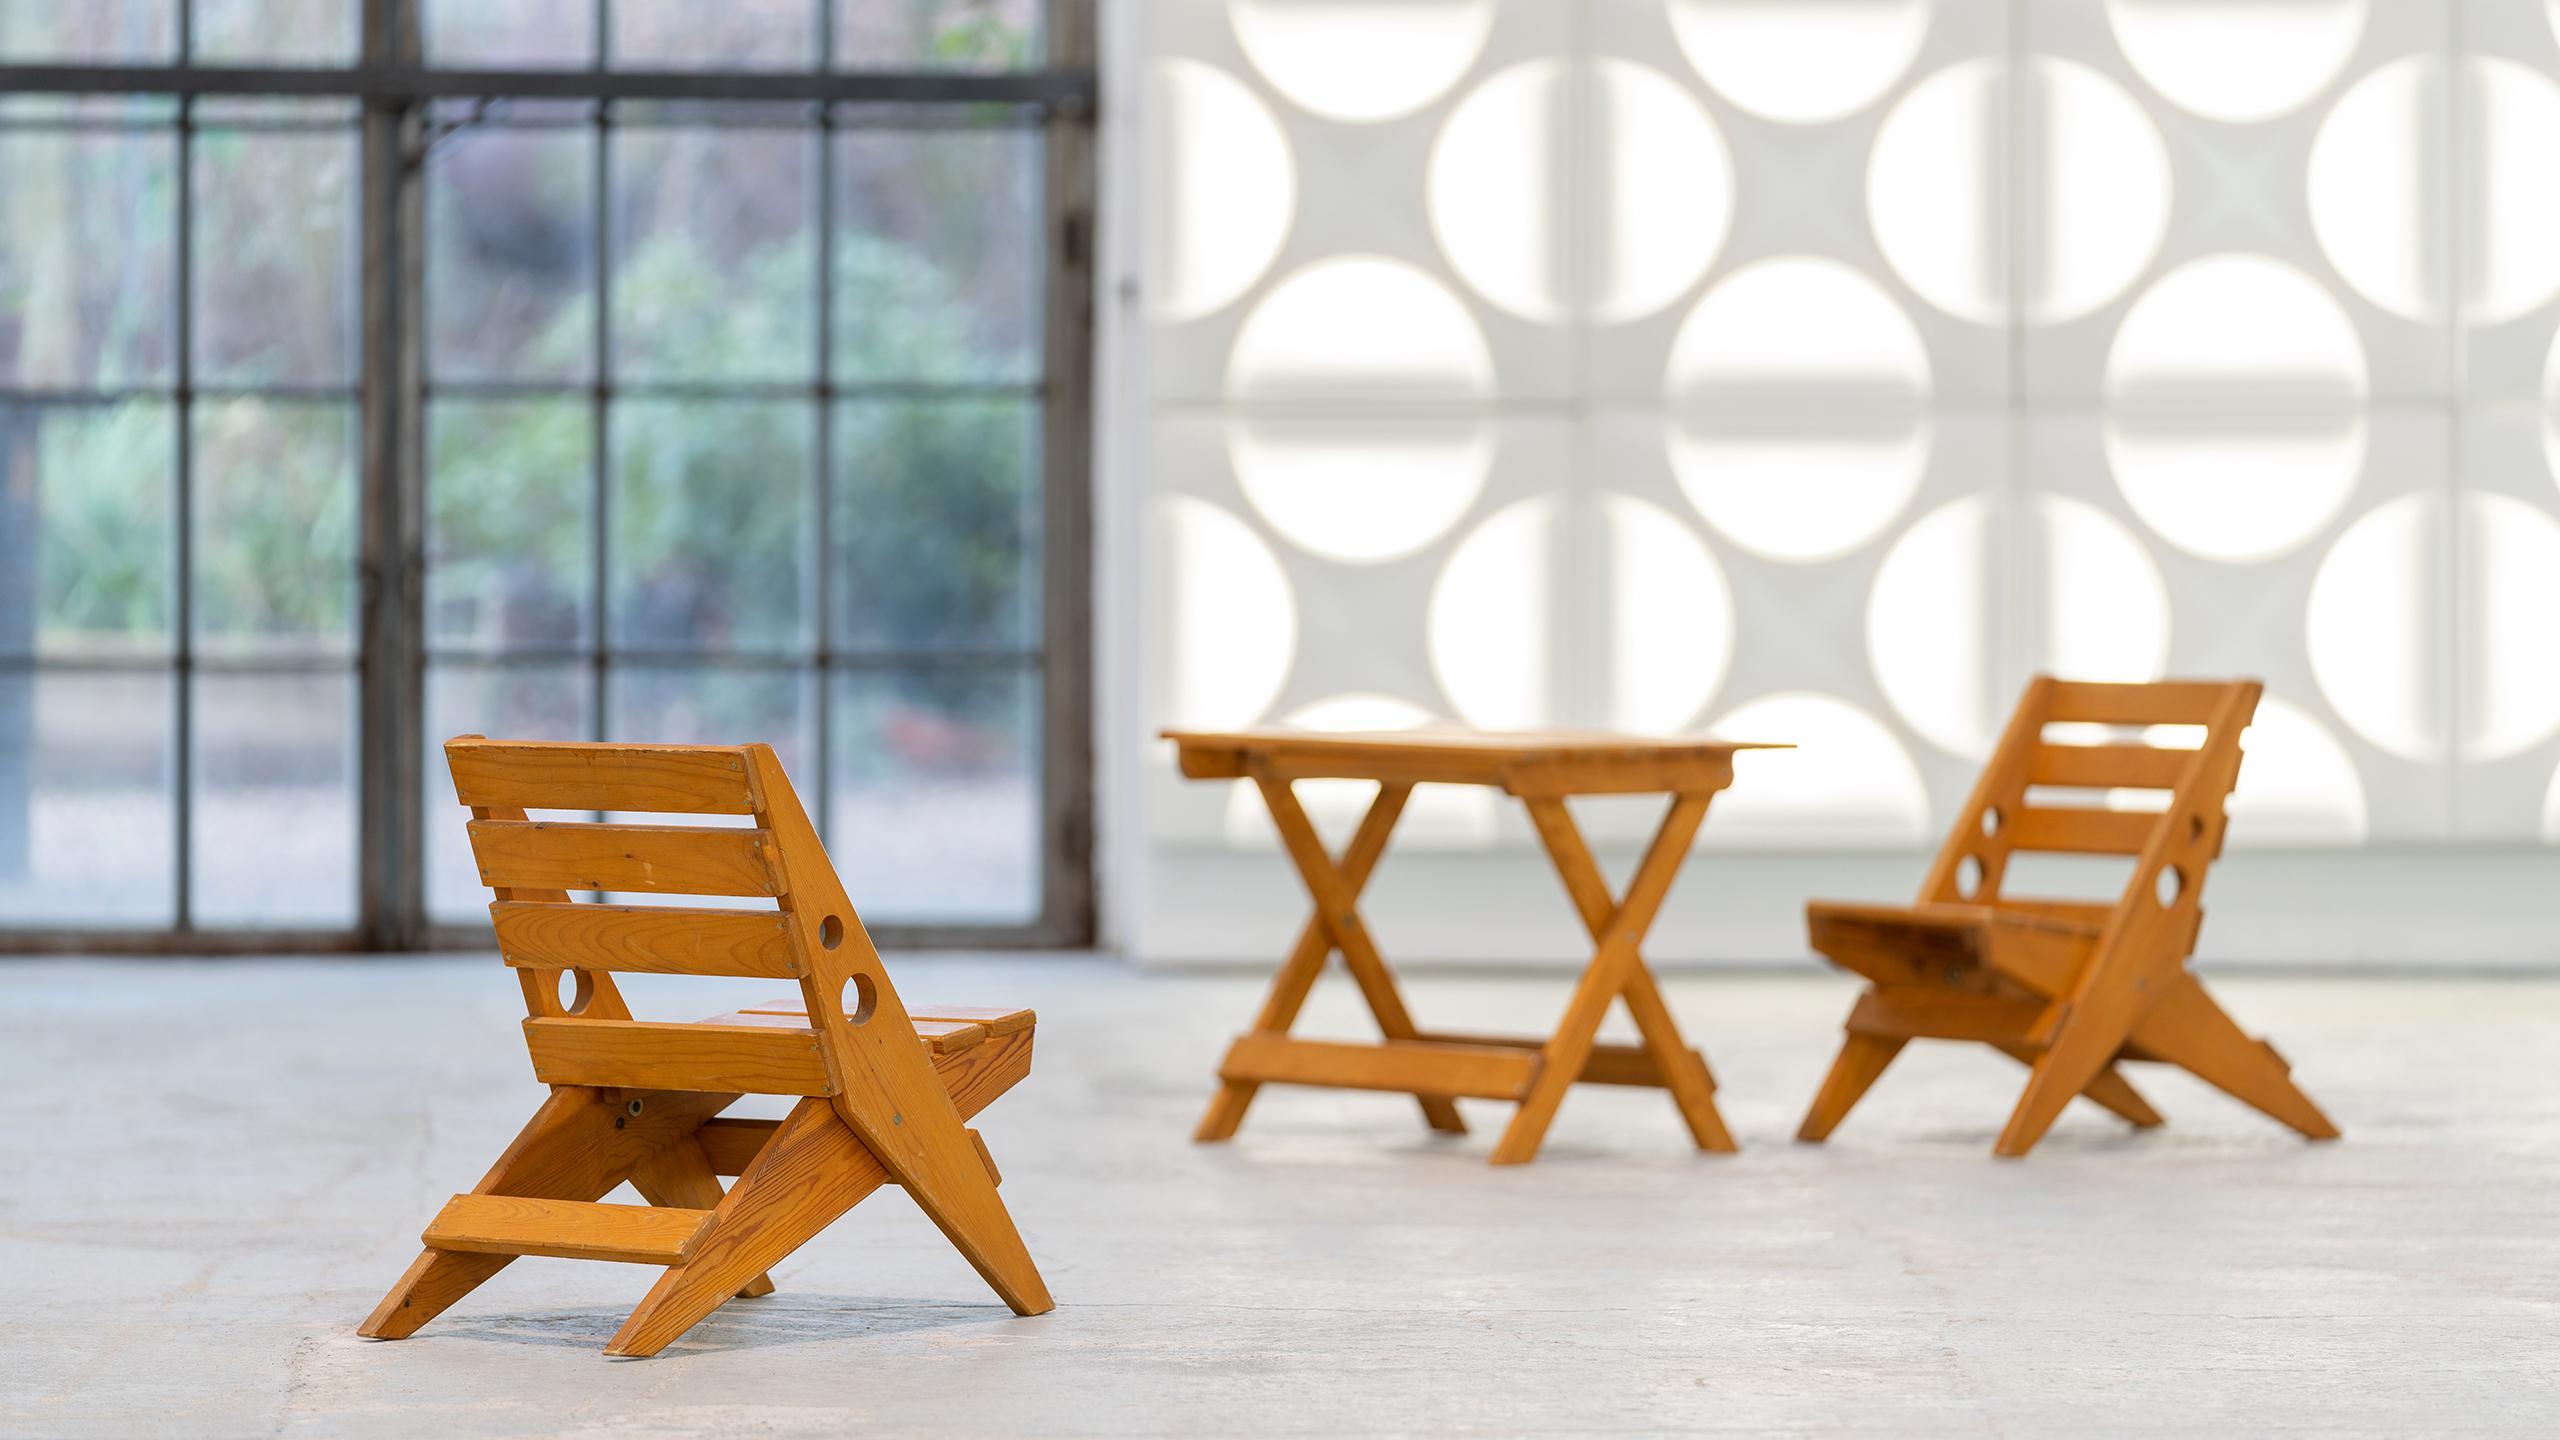 extremely charming set consisting of 2 folding chairs and a folding table, made of pine wood with fine brass details.

the chairs are based in design on the scissor chairs by charlotte perriand - they measure:
51cm high - 34.5cm wide and 56cm deep.